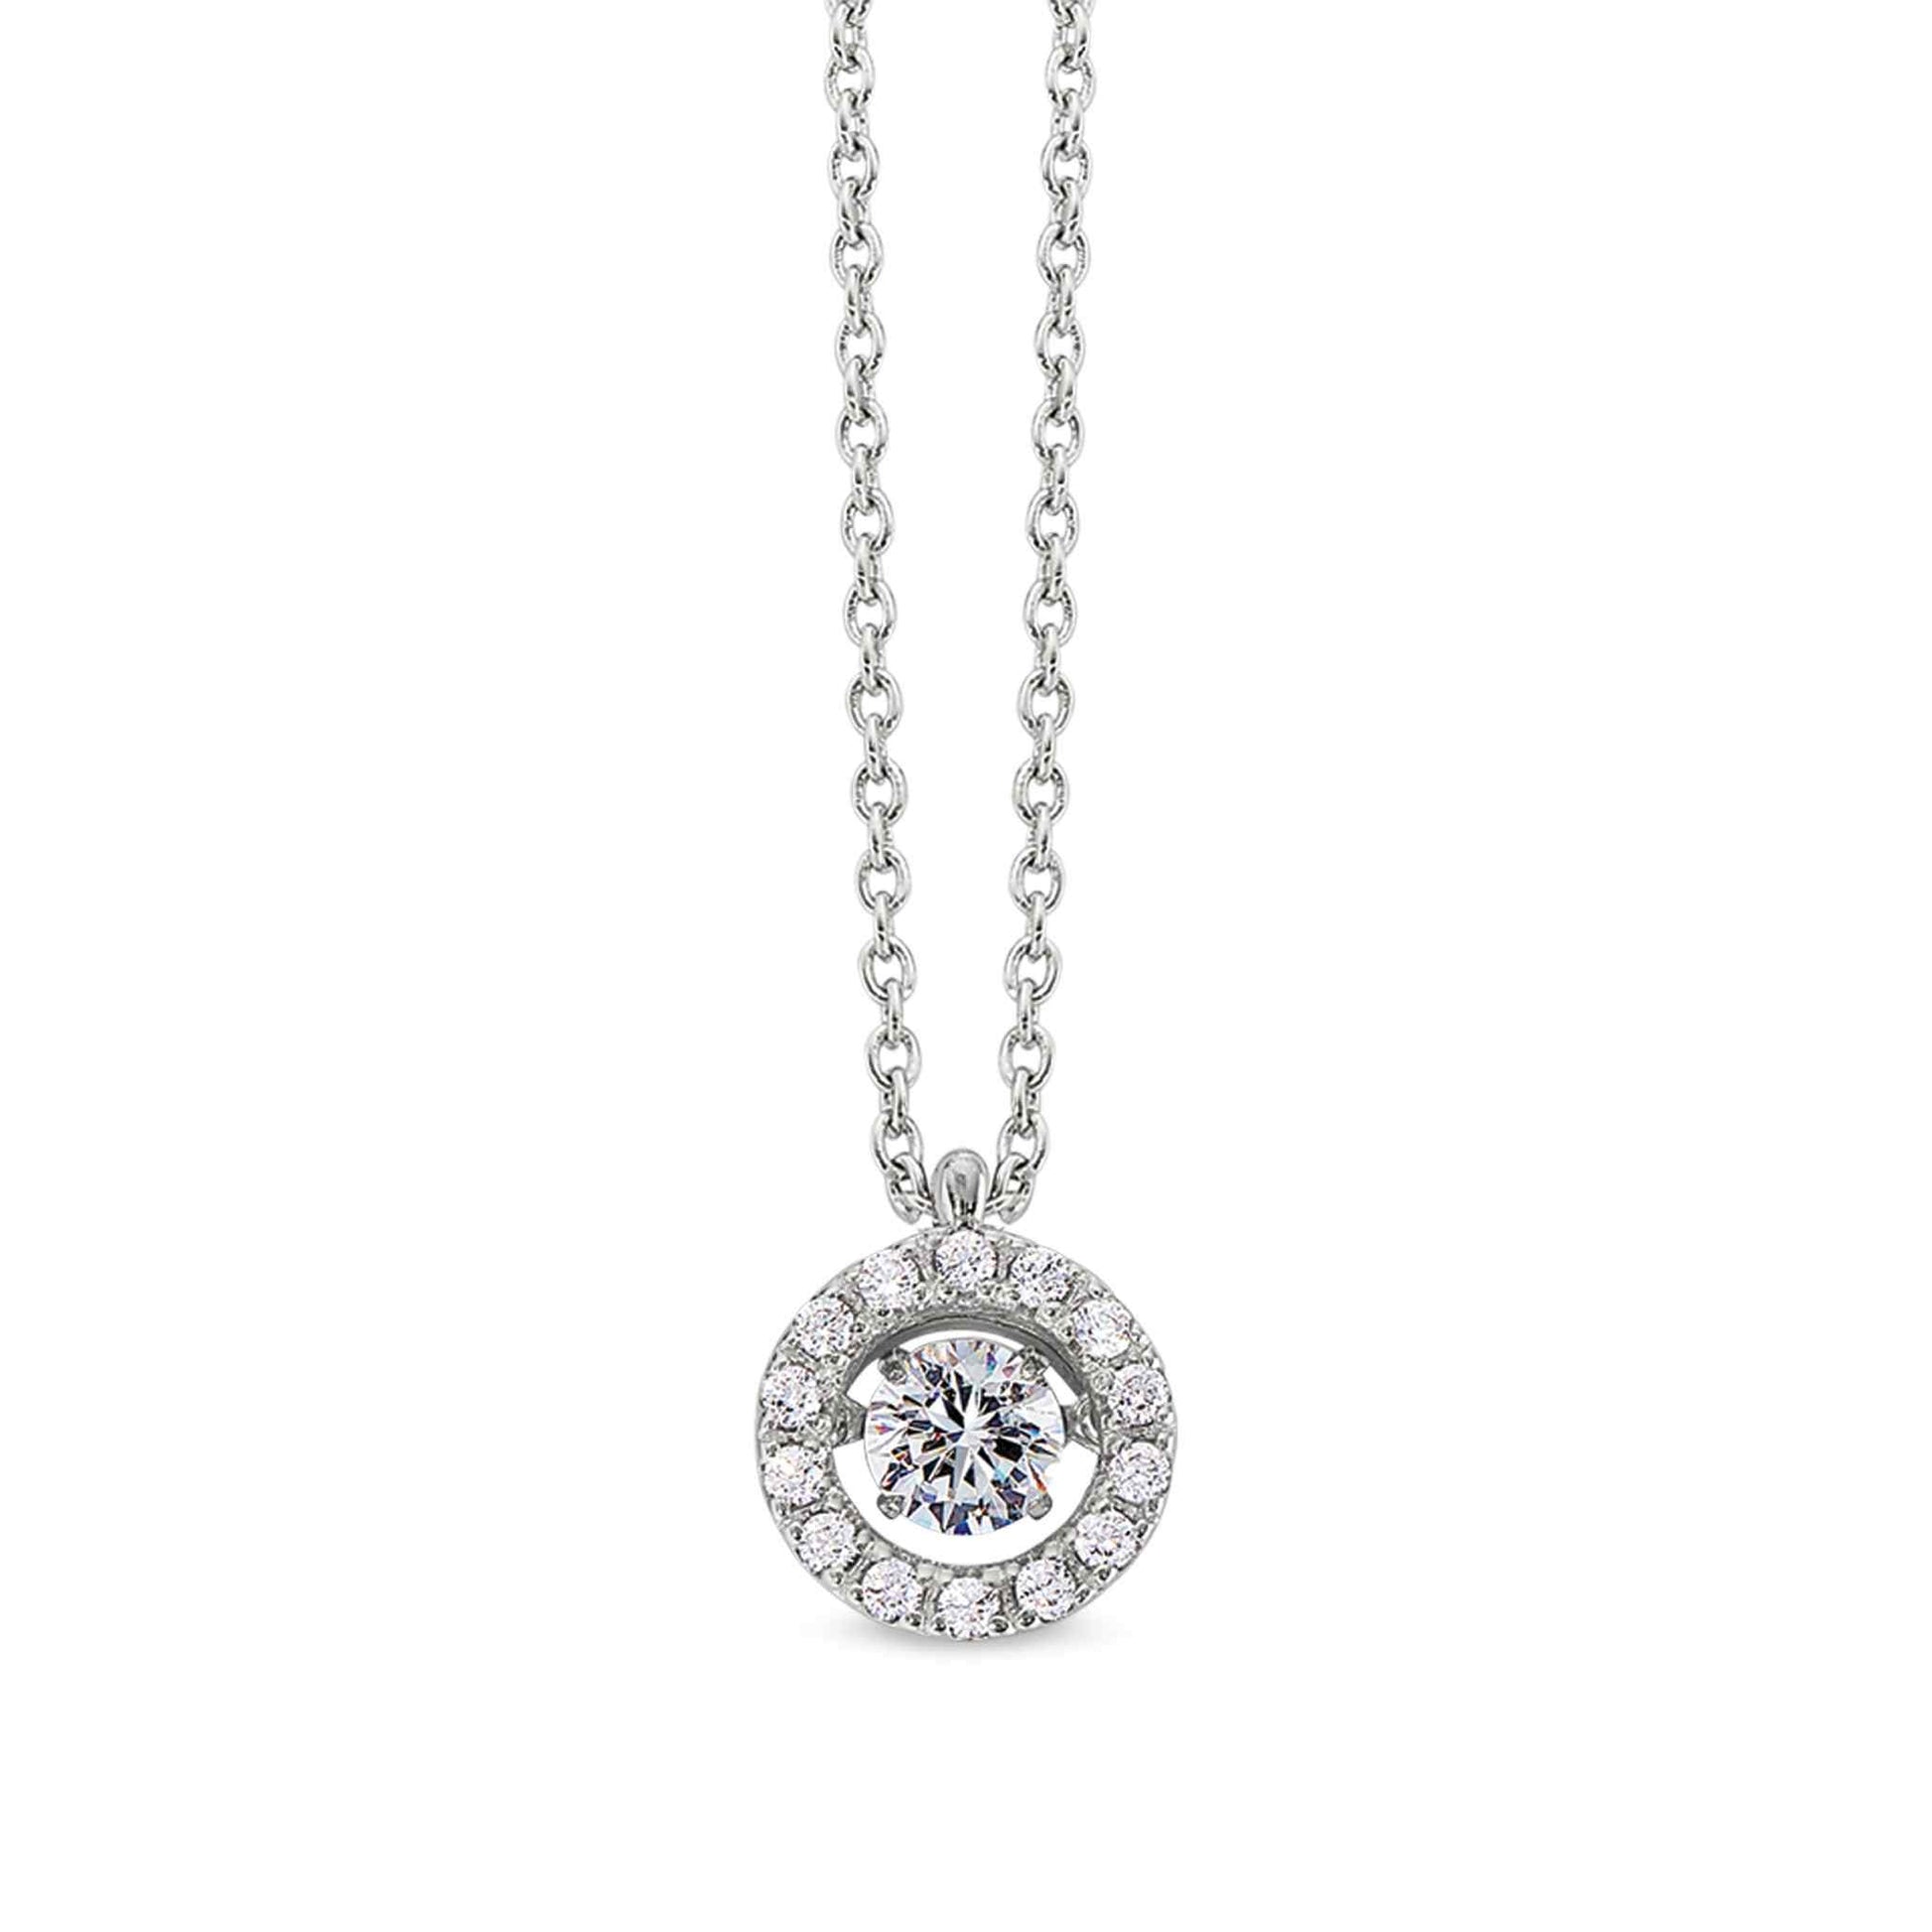 A dancing stone round pendant with simulated diamonds displayed on a neutral white background.